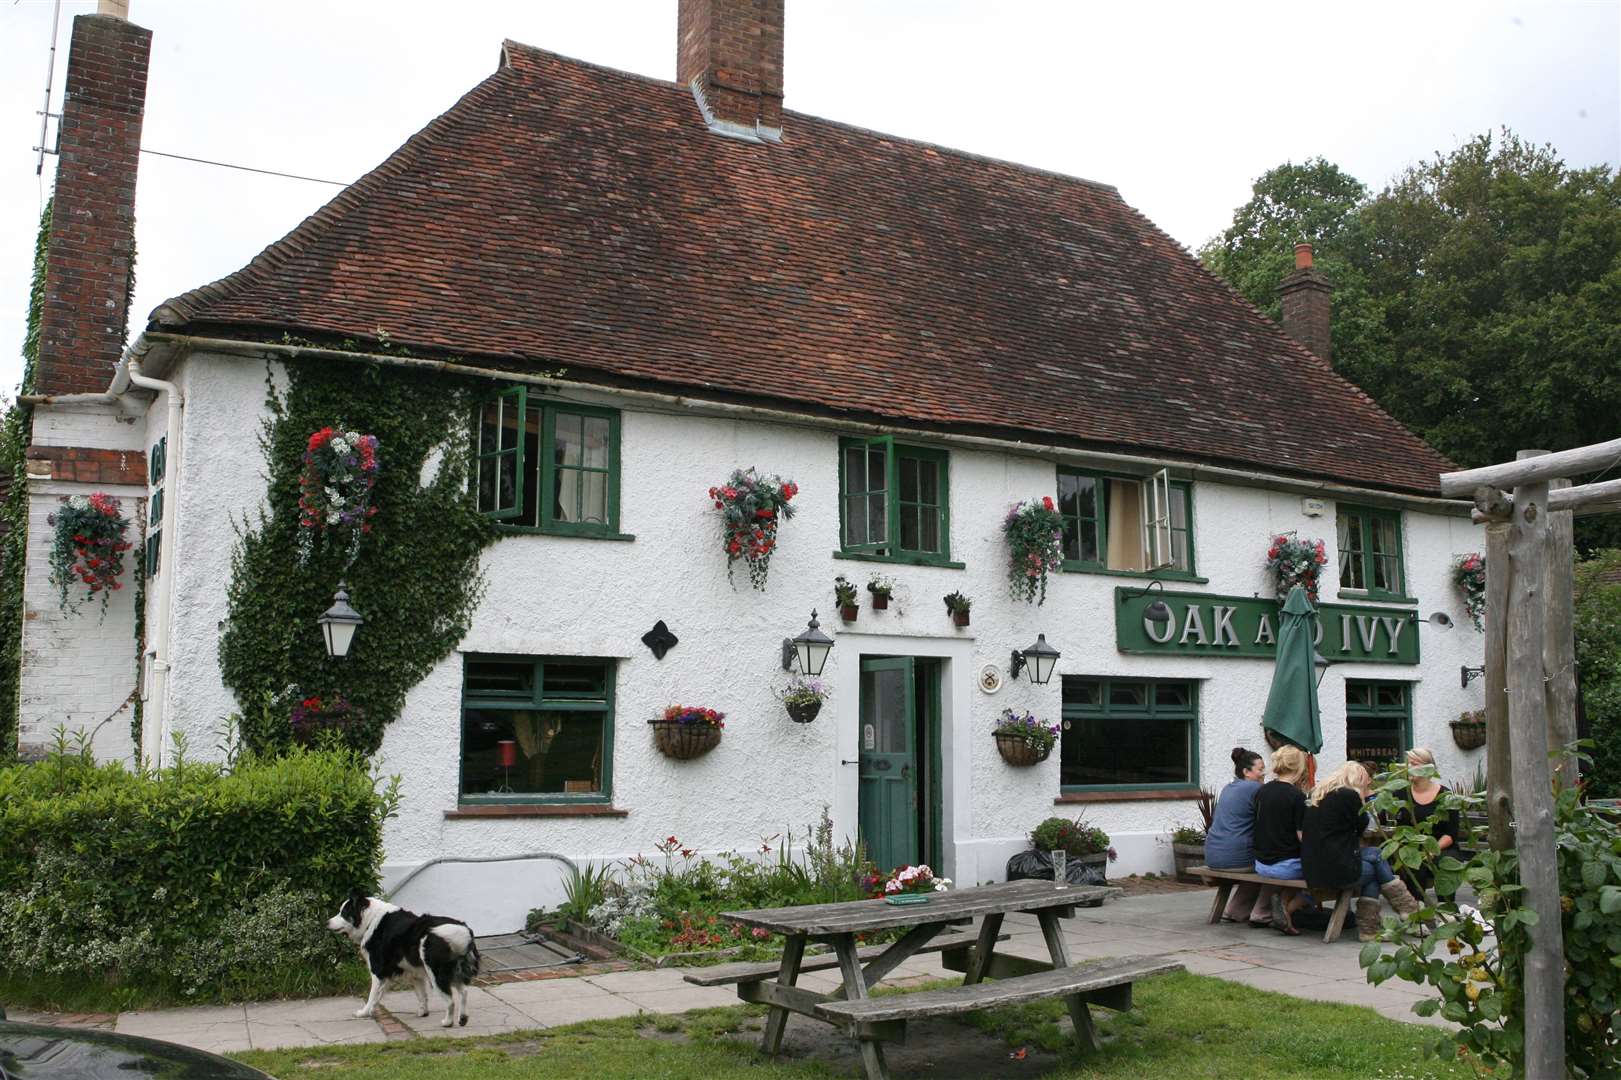 The historic Oak and Ivy in Rye Road, Hawkhurst